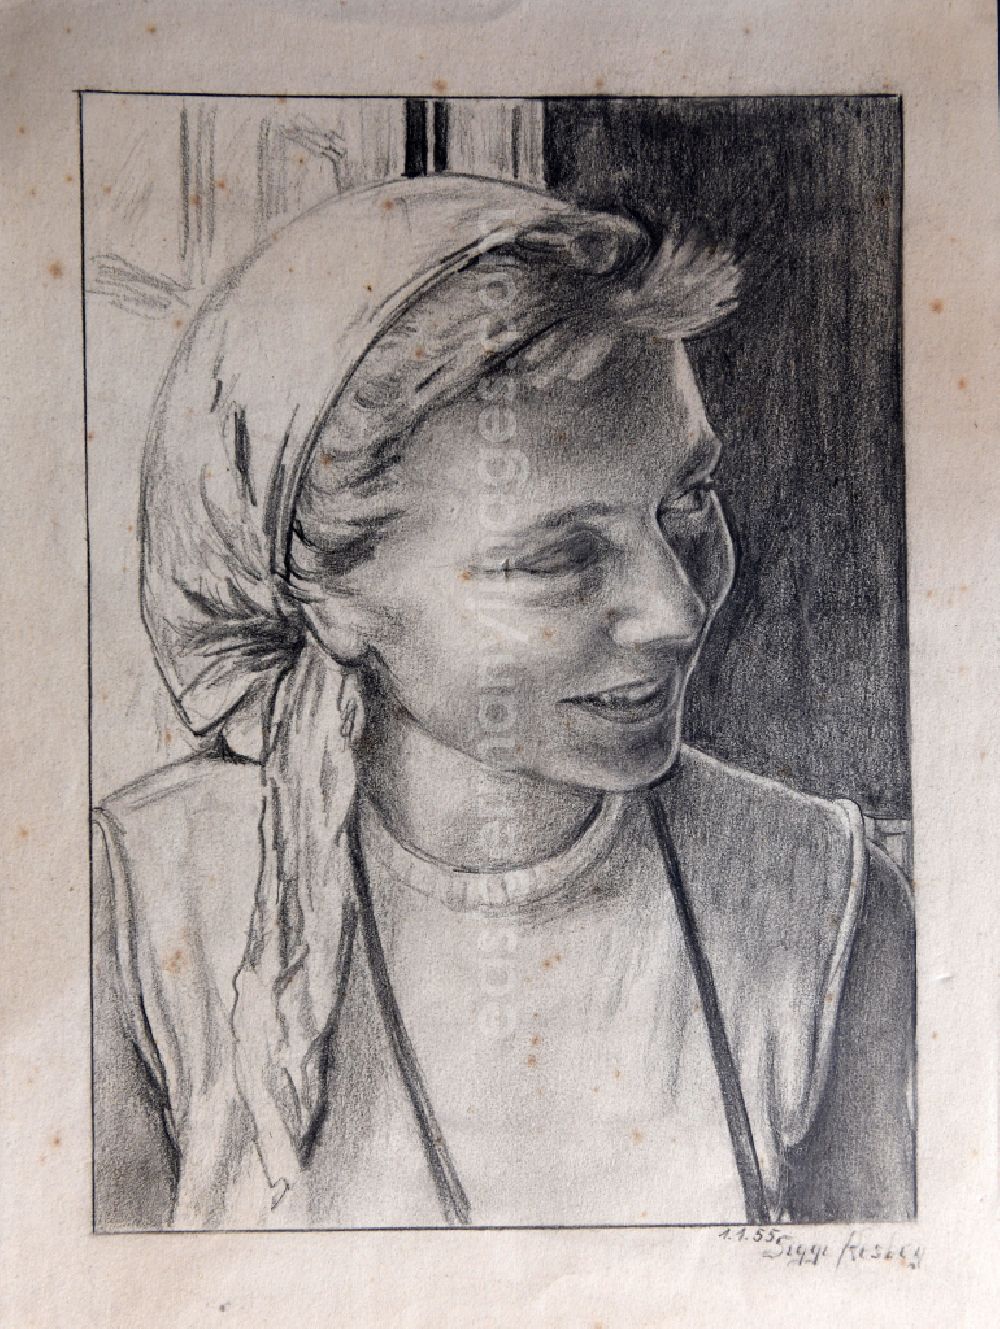 GDR photo archive: Prerow - VG picture free work: pencil drawing girl portrait by the artist Siegfried Gebser in Prerow in the state Mecklenburg-Western Pomerania on the territory of the former GDR, German Democratic Republic